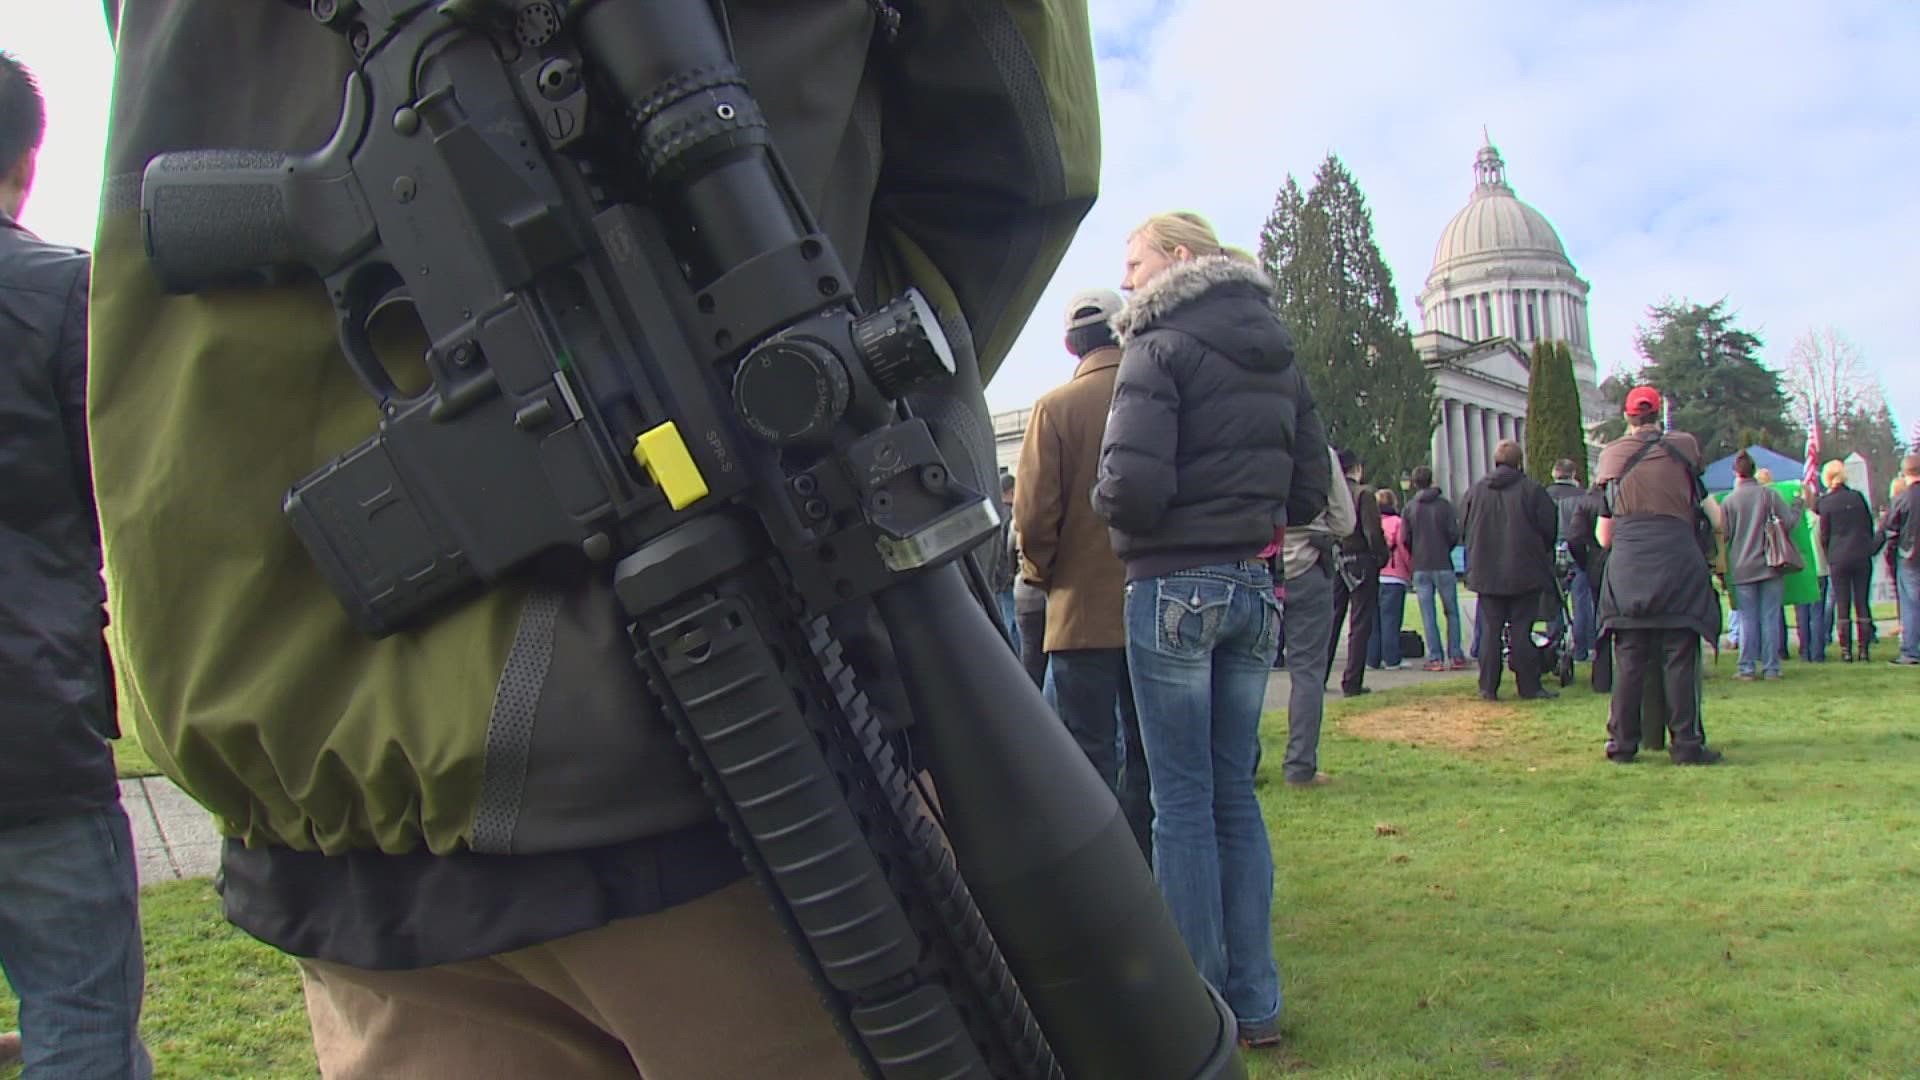 The bill would ban the manufacturing, import, distribution or sale of high capacity magazines in Washington state